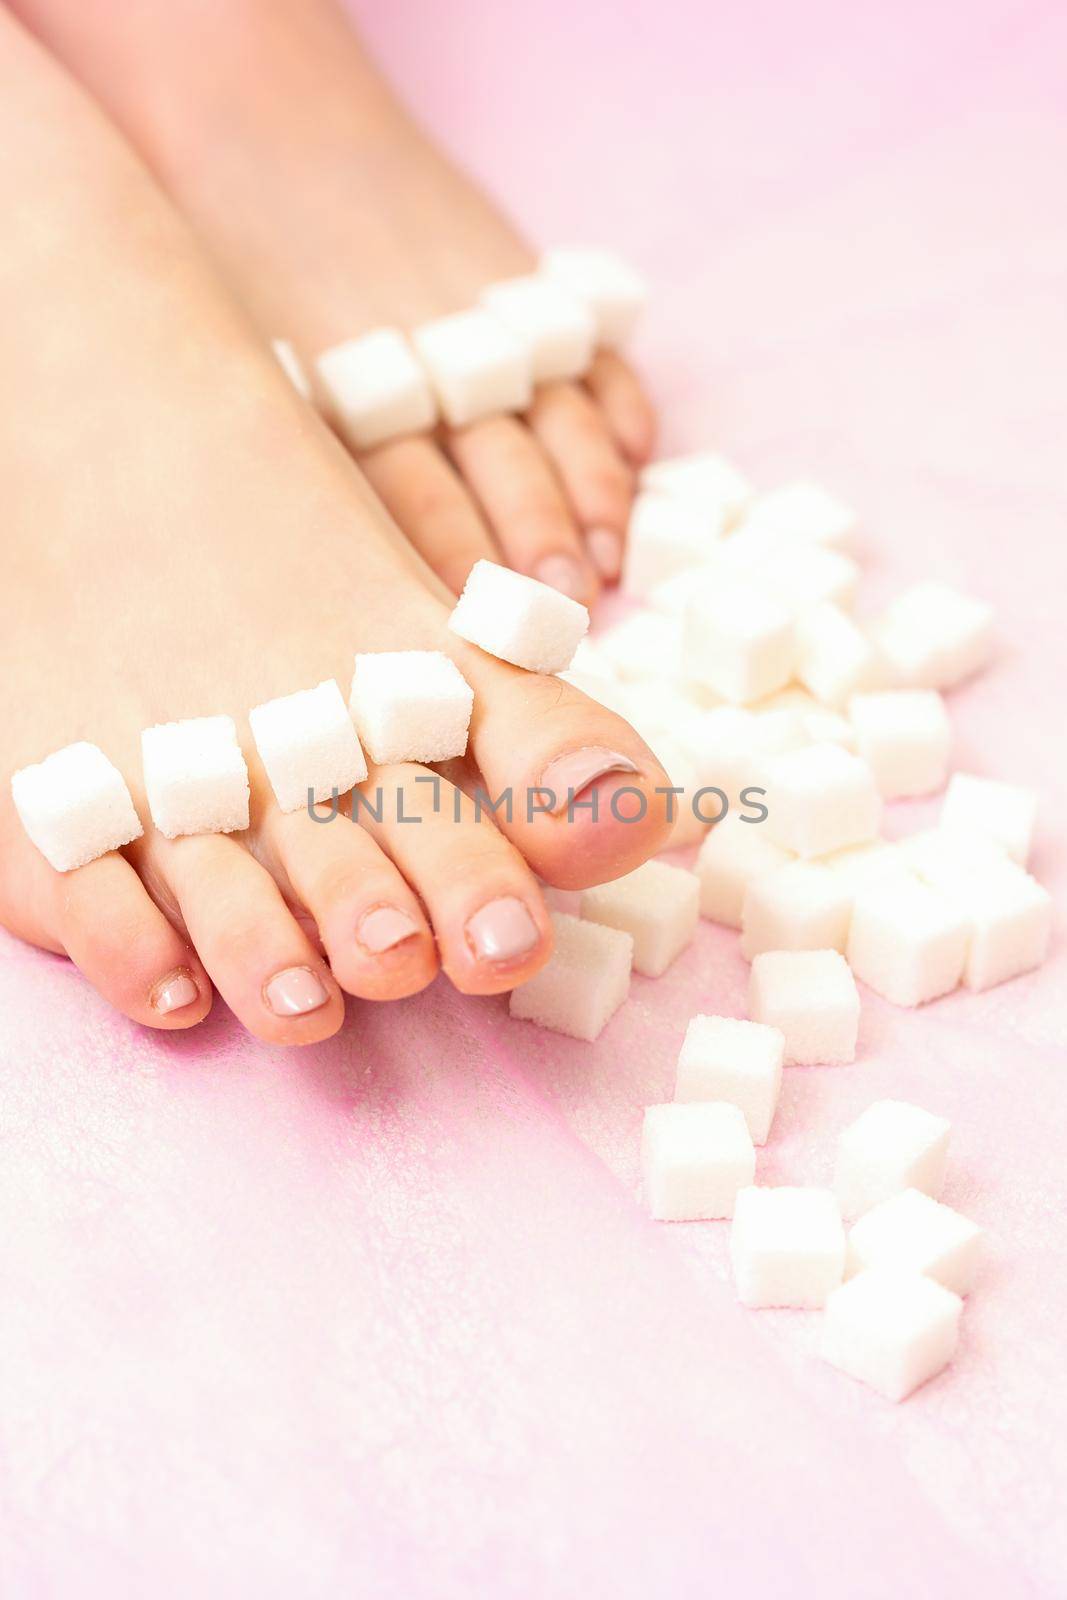 The concept of epilation, waxing. Sugar cubes lying down in a row on female feet, toes over pink background. by okskukuruza